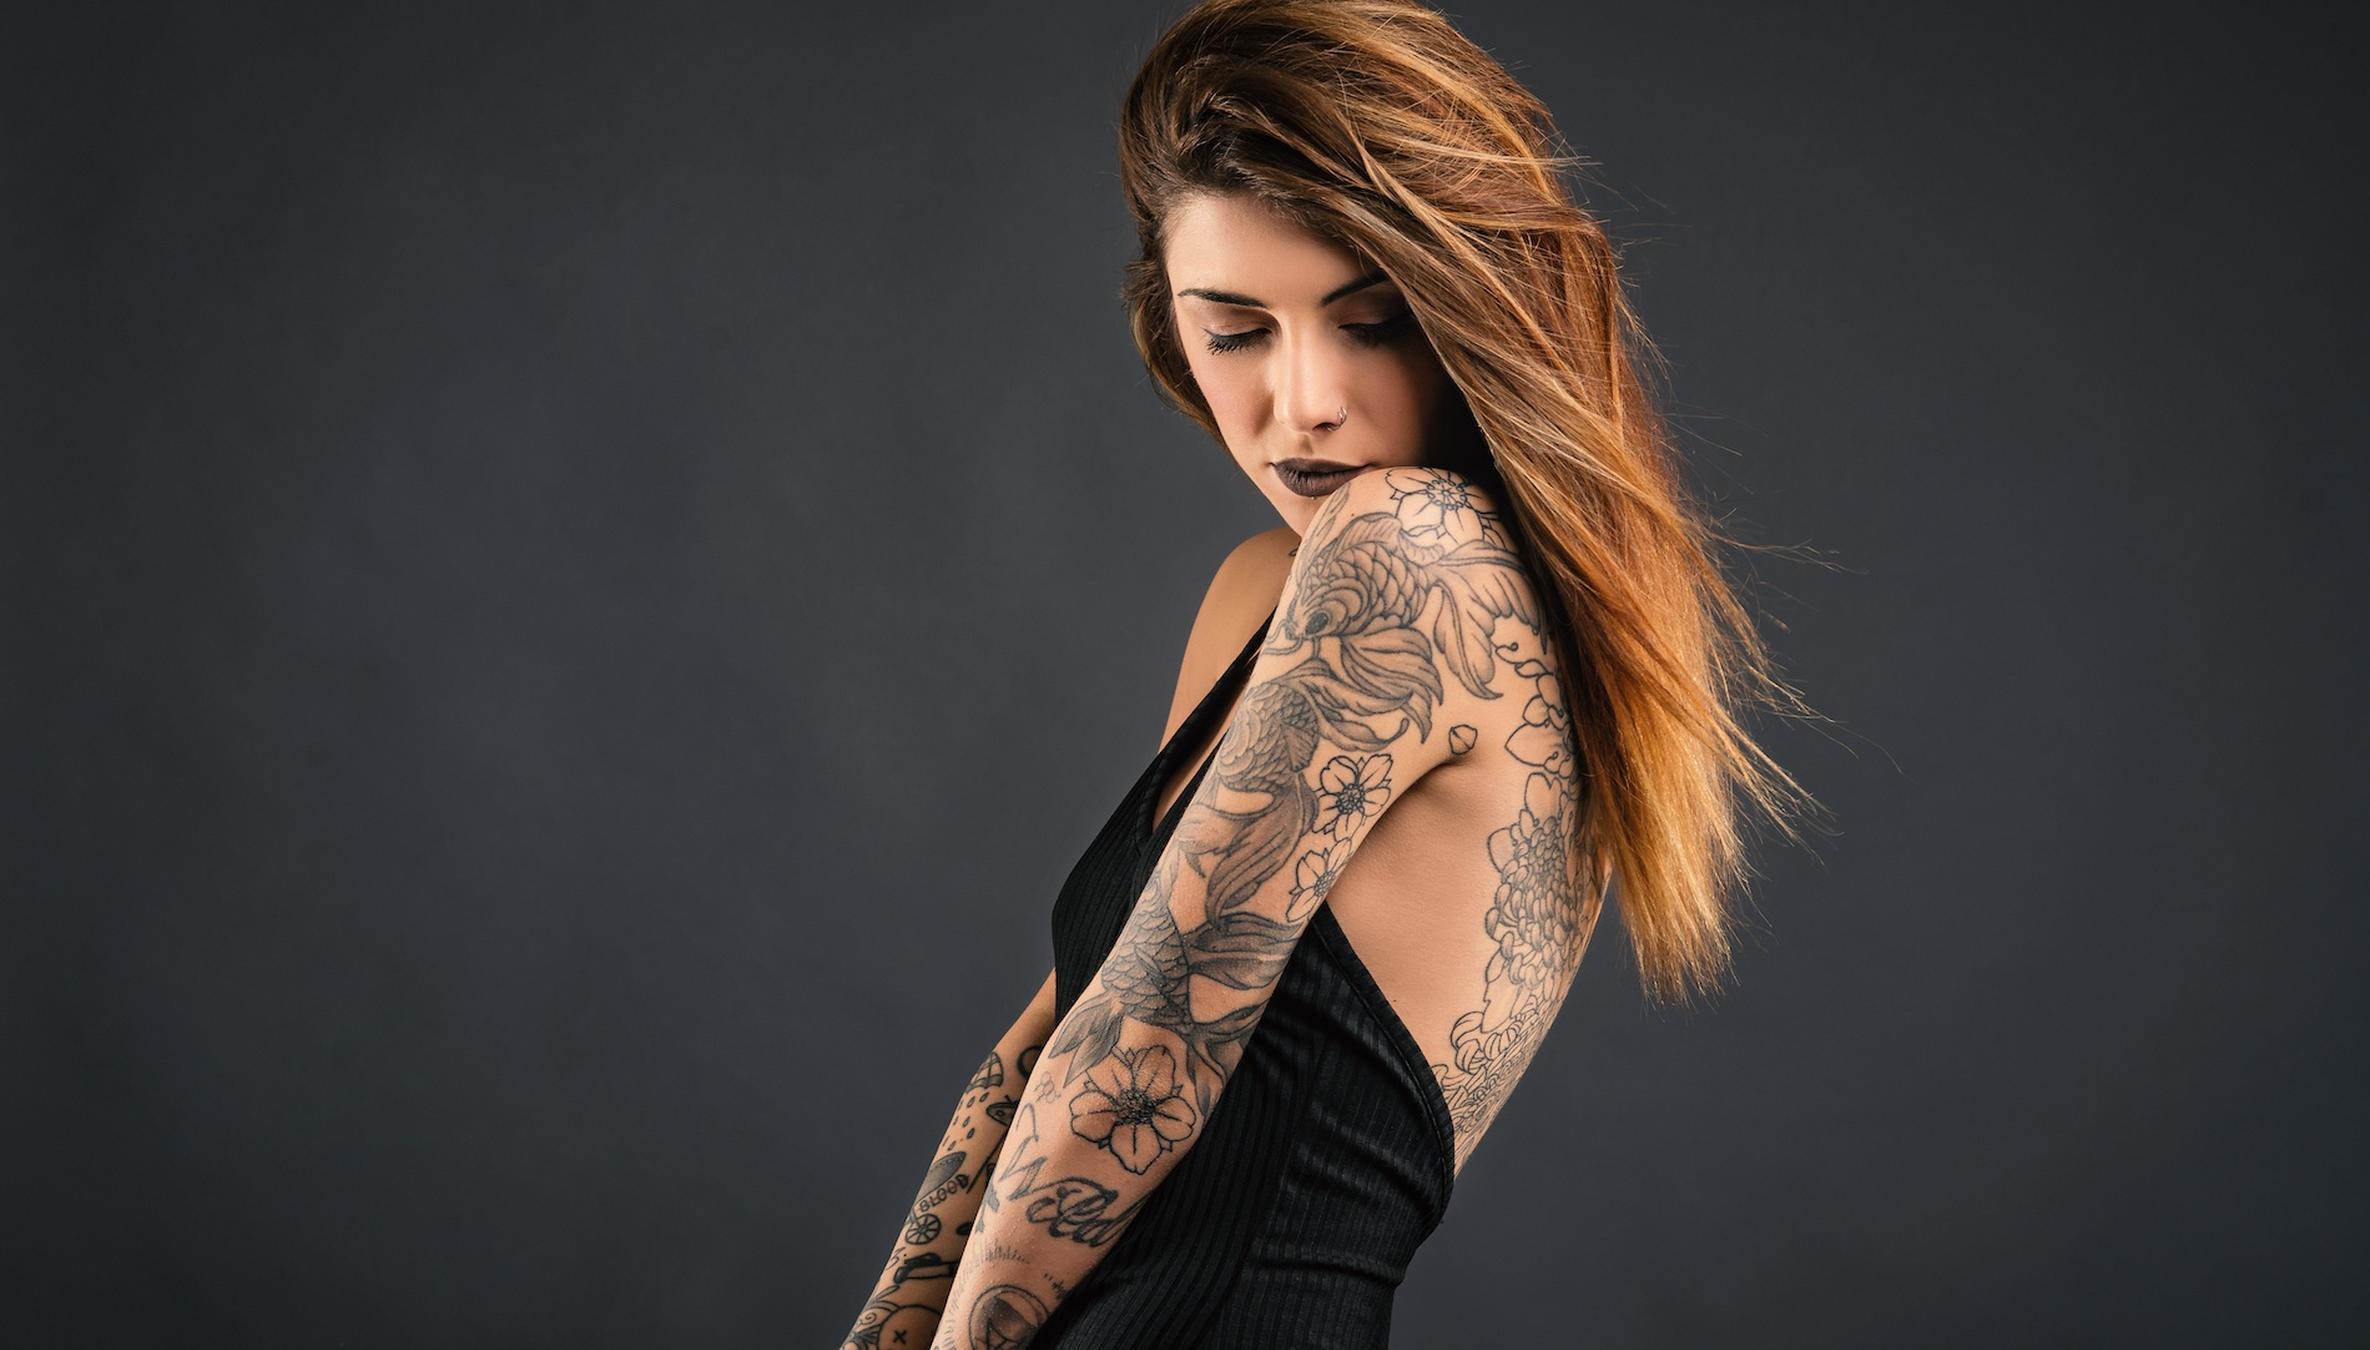 Schiesari to discuss Tattooed Under Fire as part of Difficult Dialogues  Program, Oct. 27 | UT Documentary Center | The University of Texas at Austin